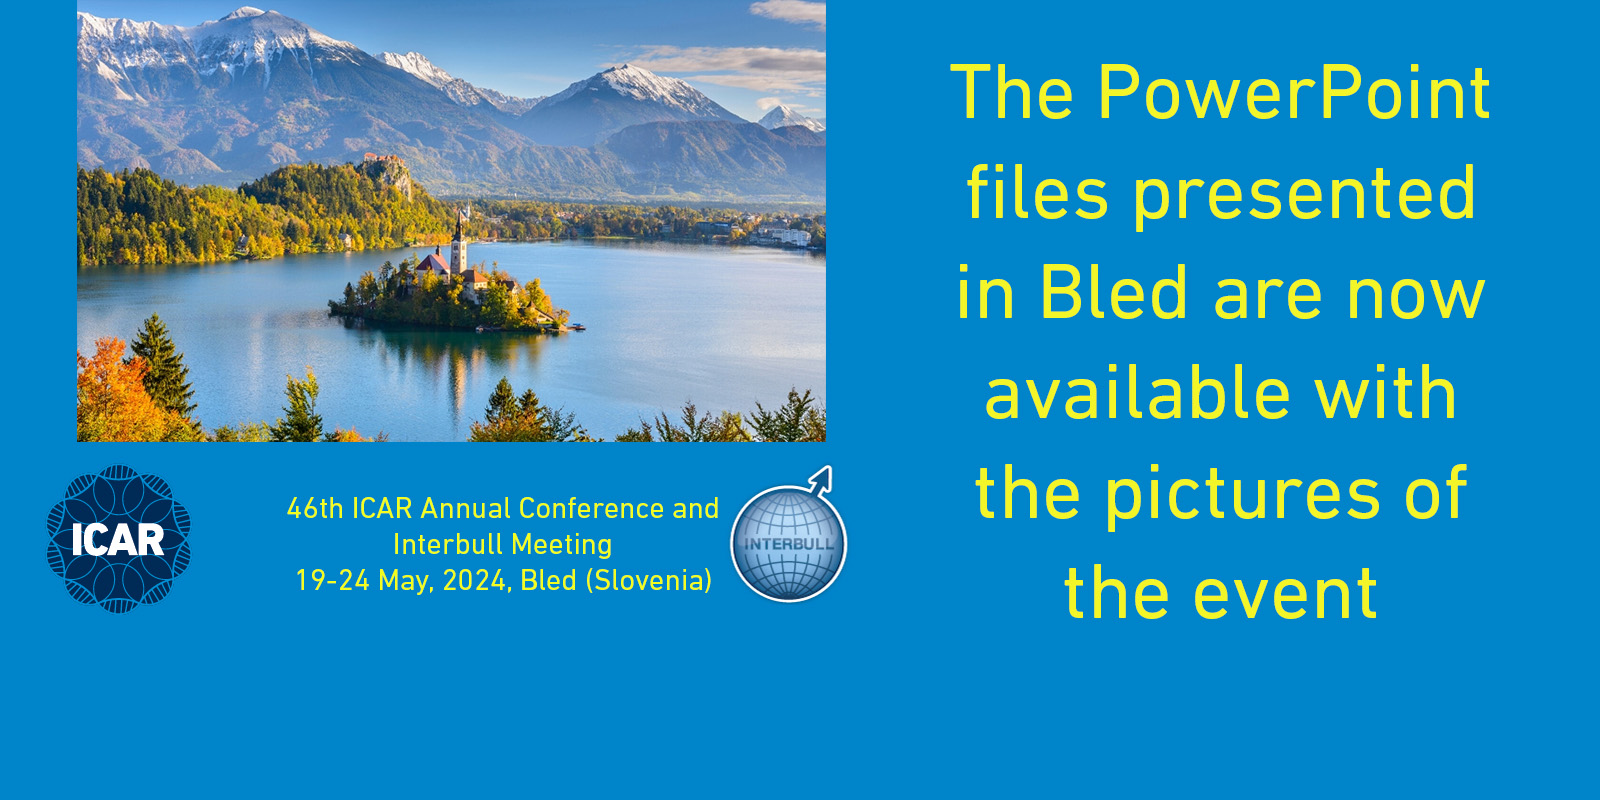 ICAR 2024 Annual Conference in Bled